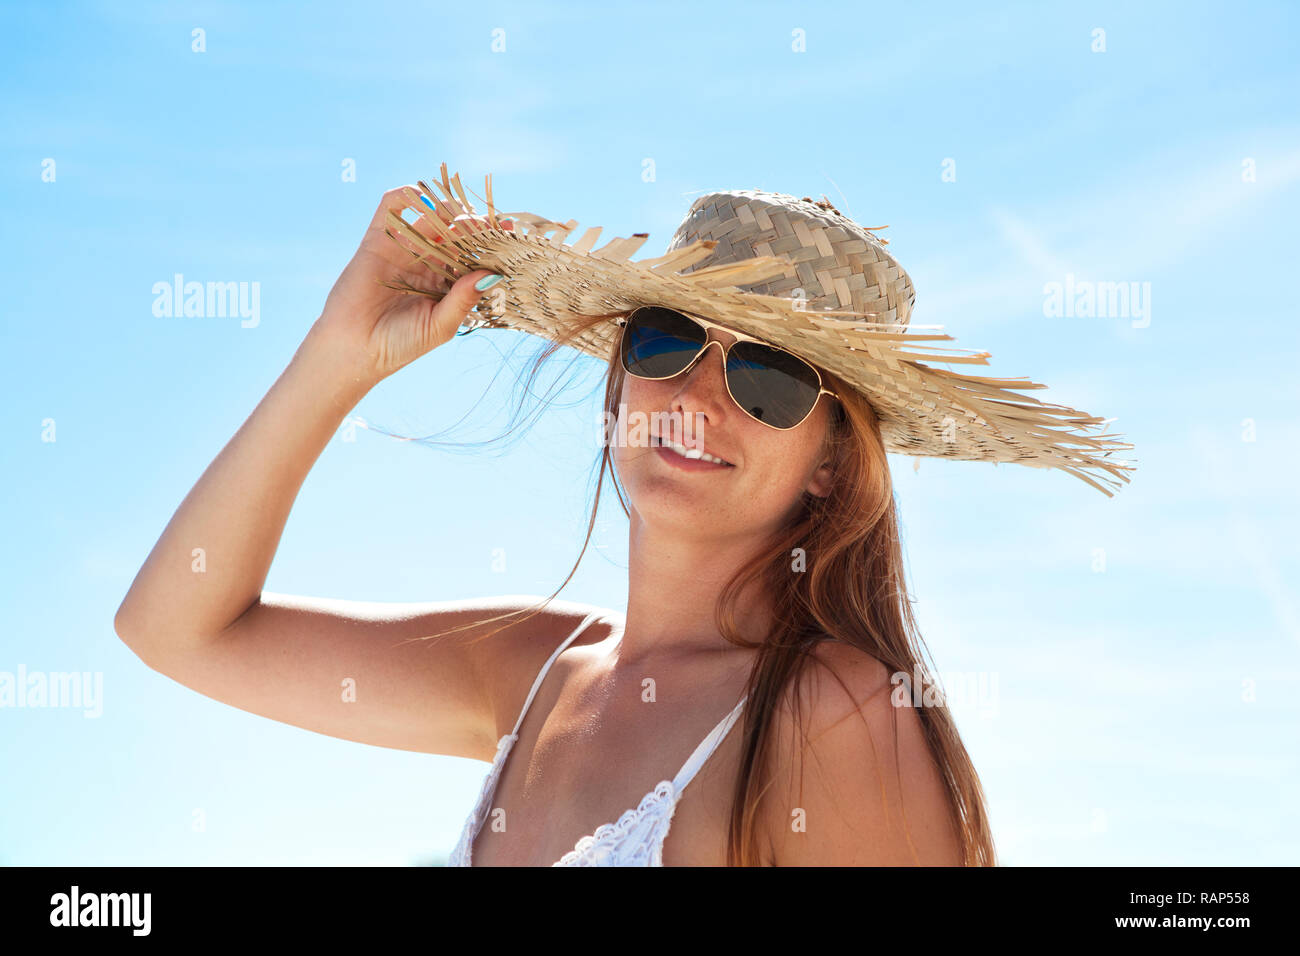 a young woman with long brown hair and sunglasses on the beach wearing a straw hat Stock Photo